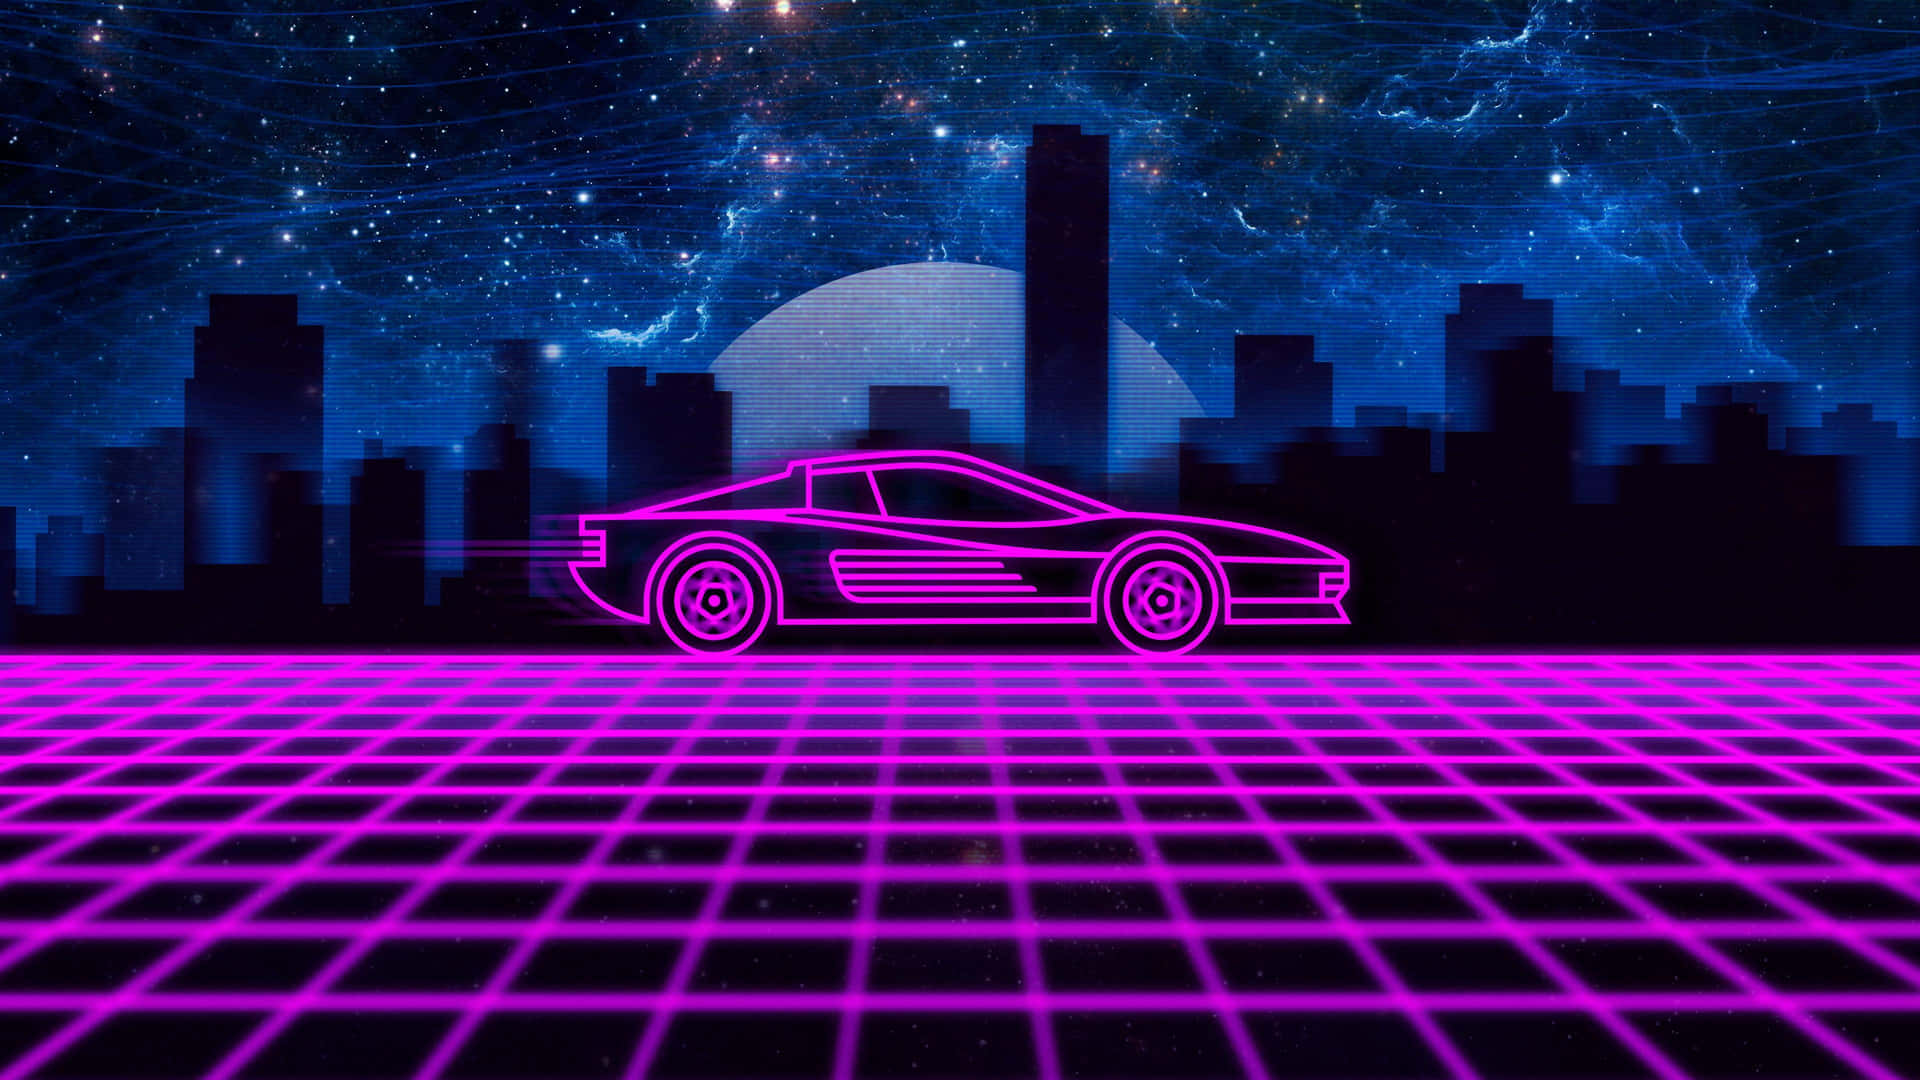 Cruise through the neon world of Synthwave